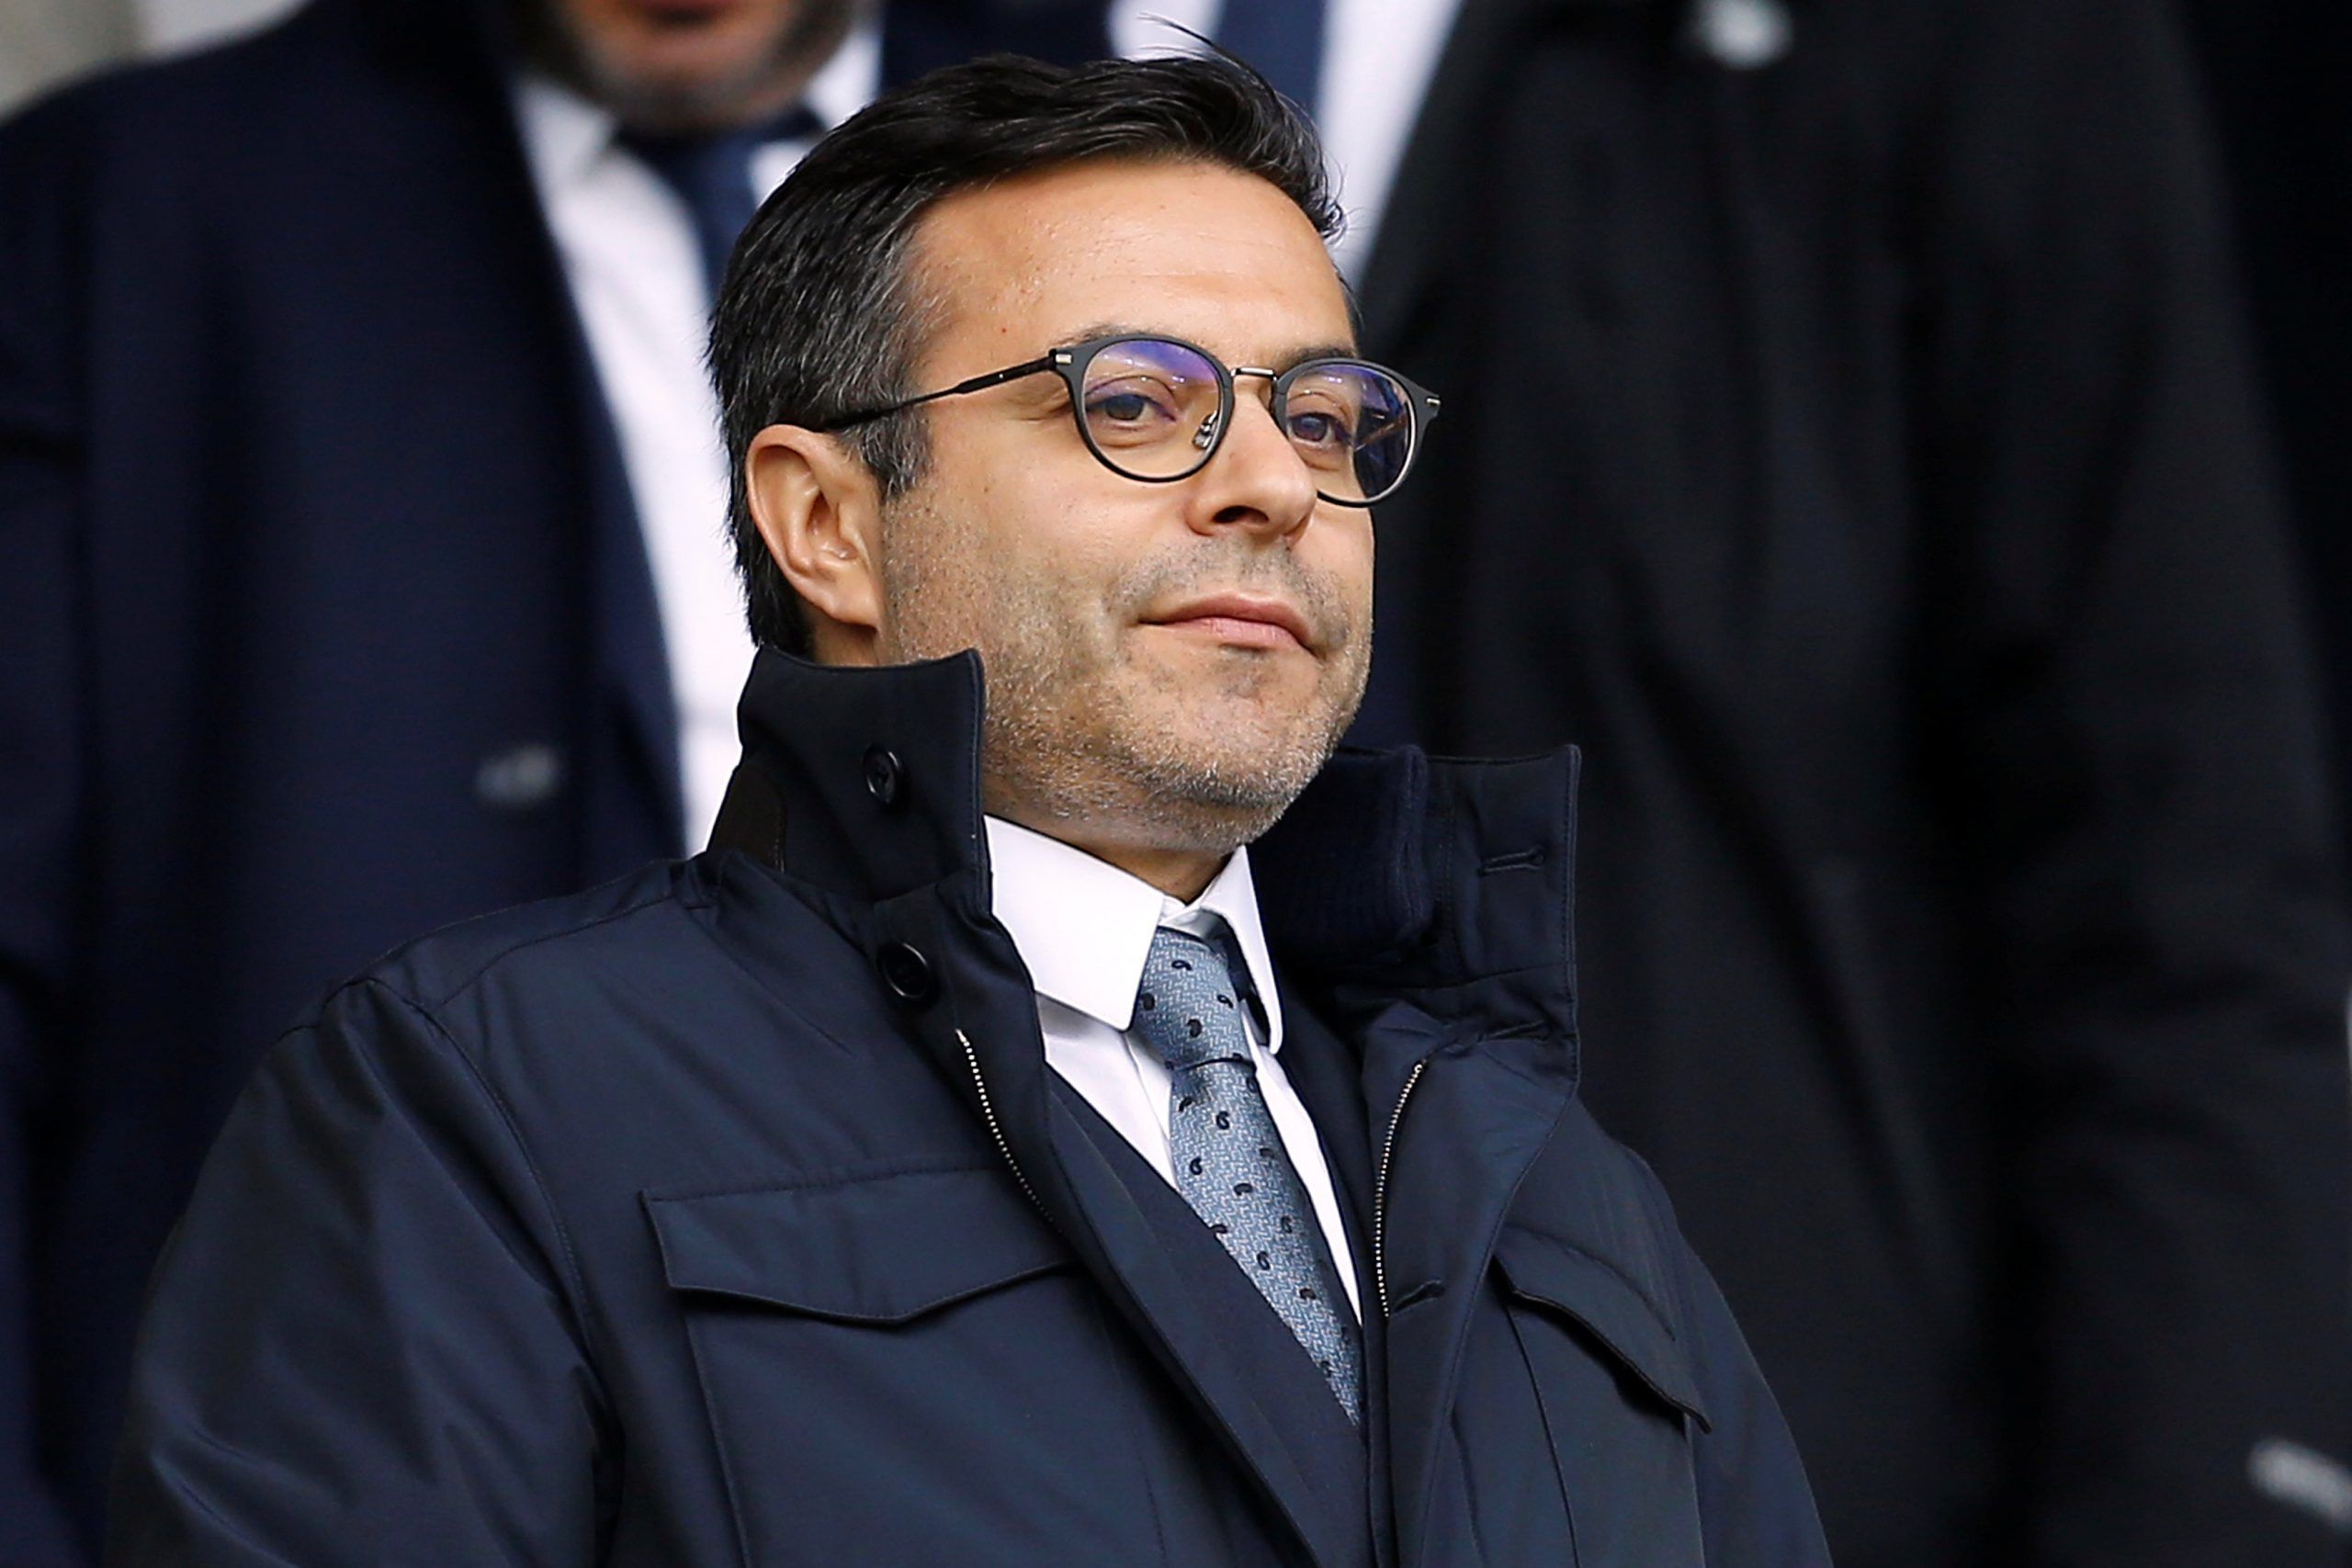 Soccer Football - Championship Play-Off Semi Final First Leg - Derby County v Leeds United - Pride Park, Derby, Britain - May 11, 2019   Leeds United chairman Andrea Radrizzani looks on from the stands              Action Images via Reuters/Craig Brough    EDITORIAL USE ONLY. No use with unauthorized audio, video, data, fixture lists, club/league logos or 